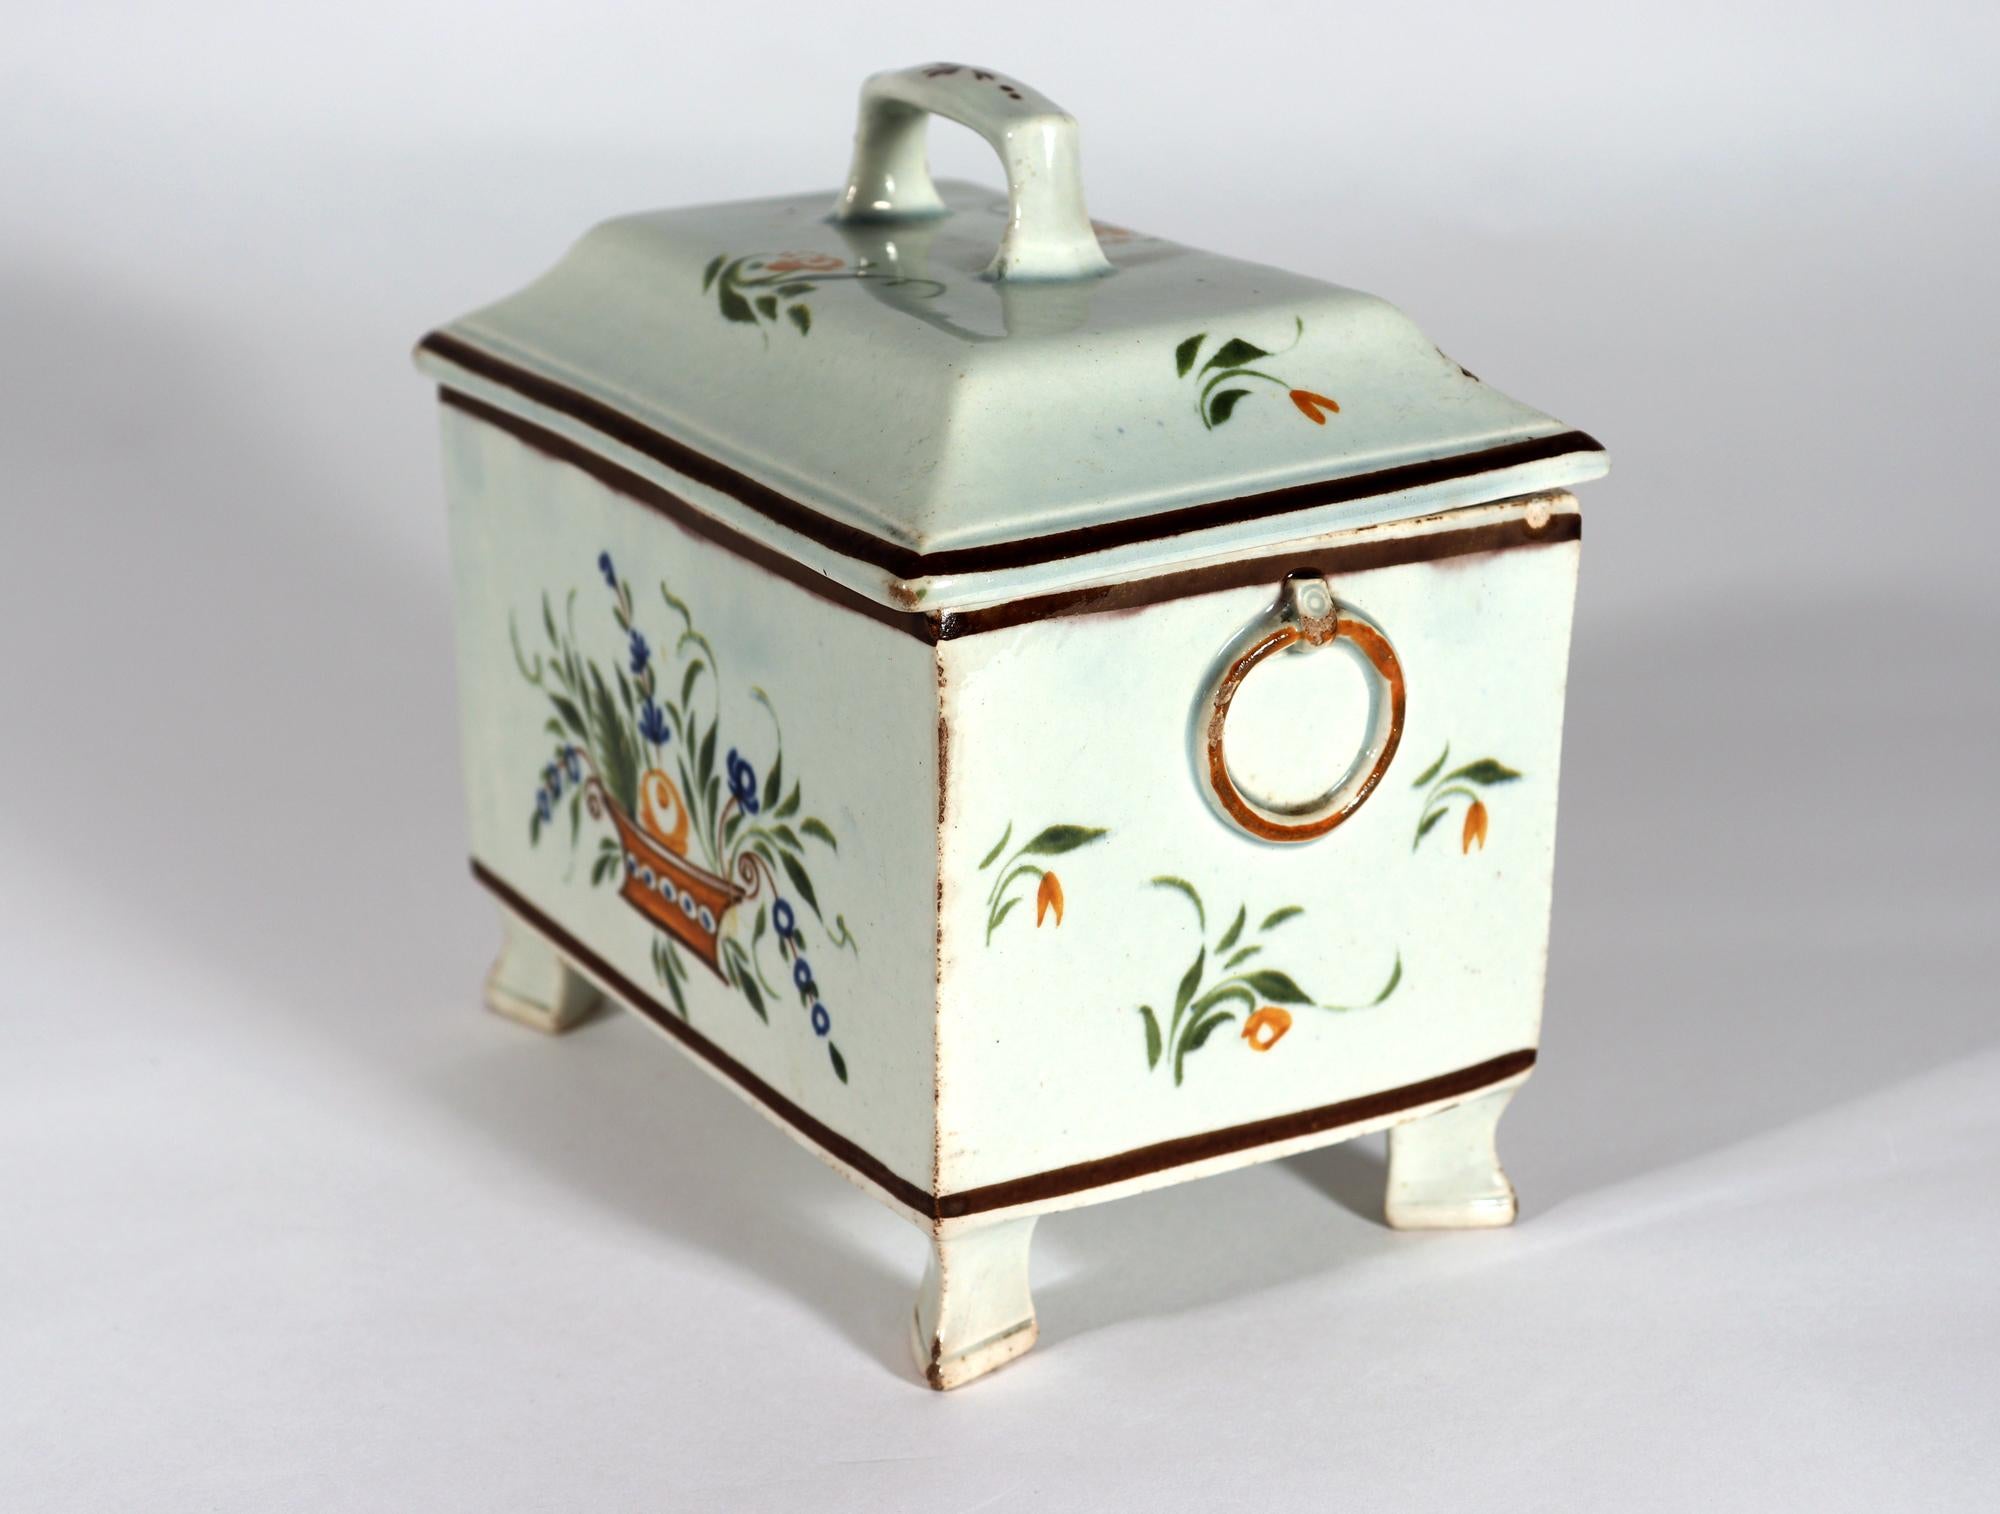 Pearlware Prattware pottery covered Botanical tea caddy box,
Cambrian Pottery, Swansea
Circa 1800-20

The rectangular-shaped pearlware pottery covered footed Tea Caddy is painted in Pratt colors of blue, green and orange on each side with